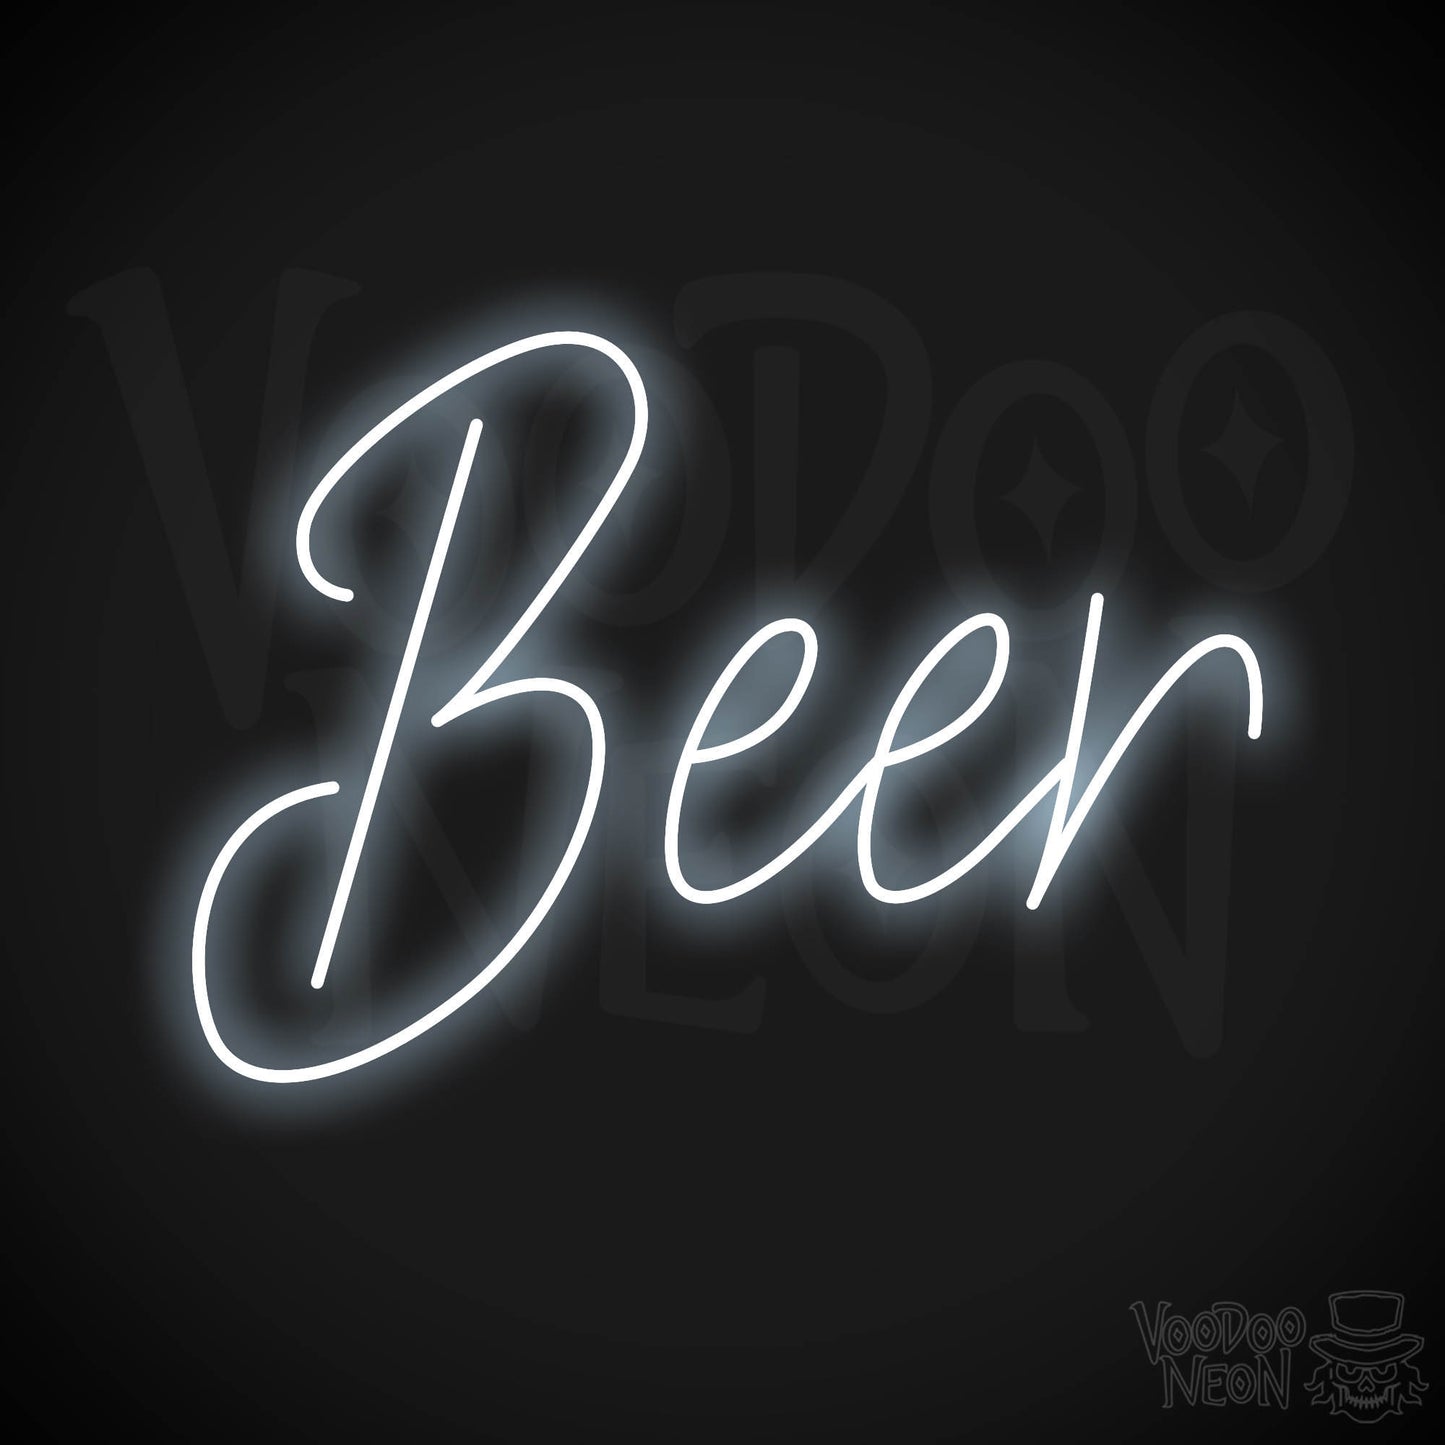 Beer LED Neon - Cool White